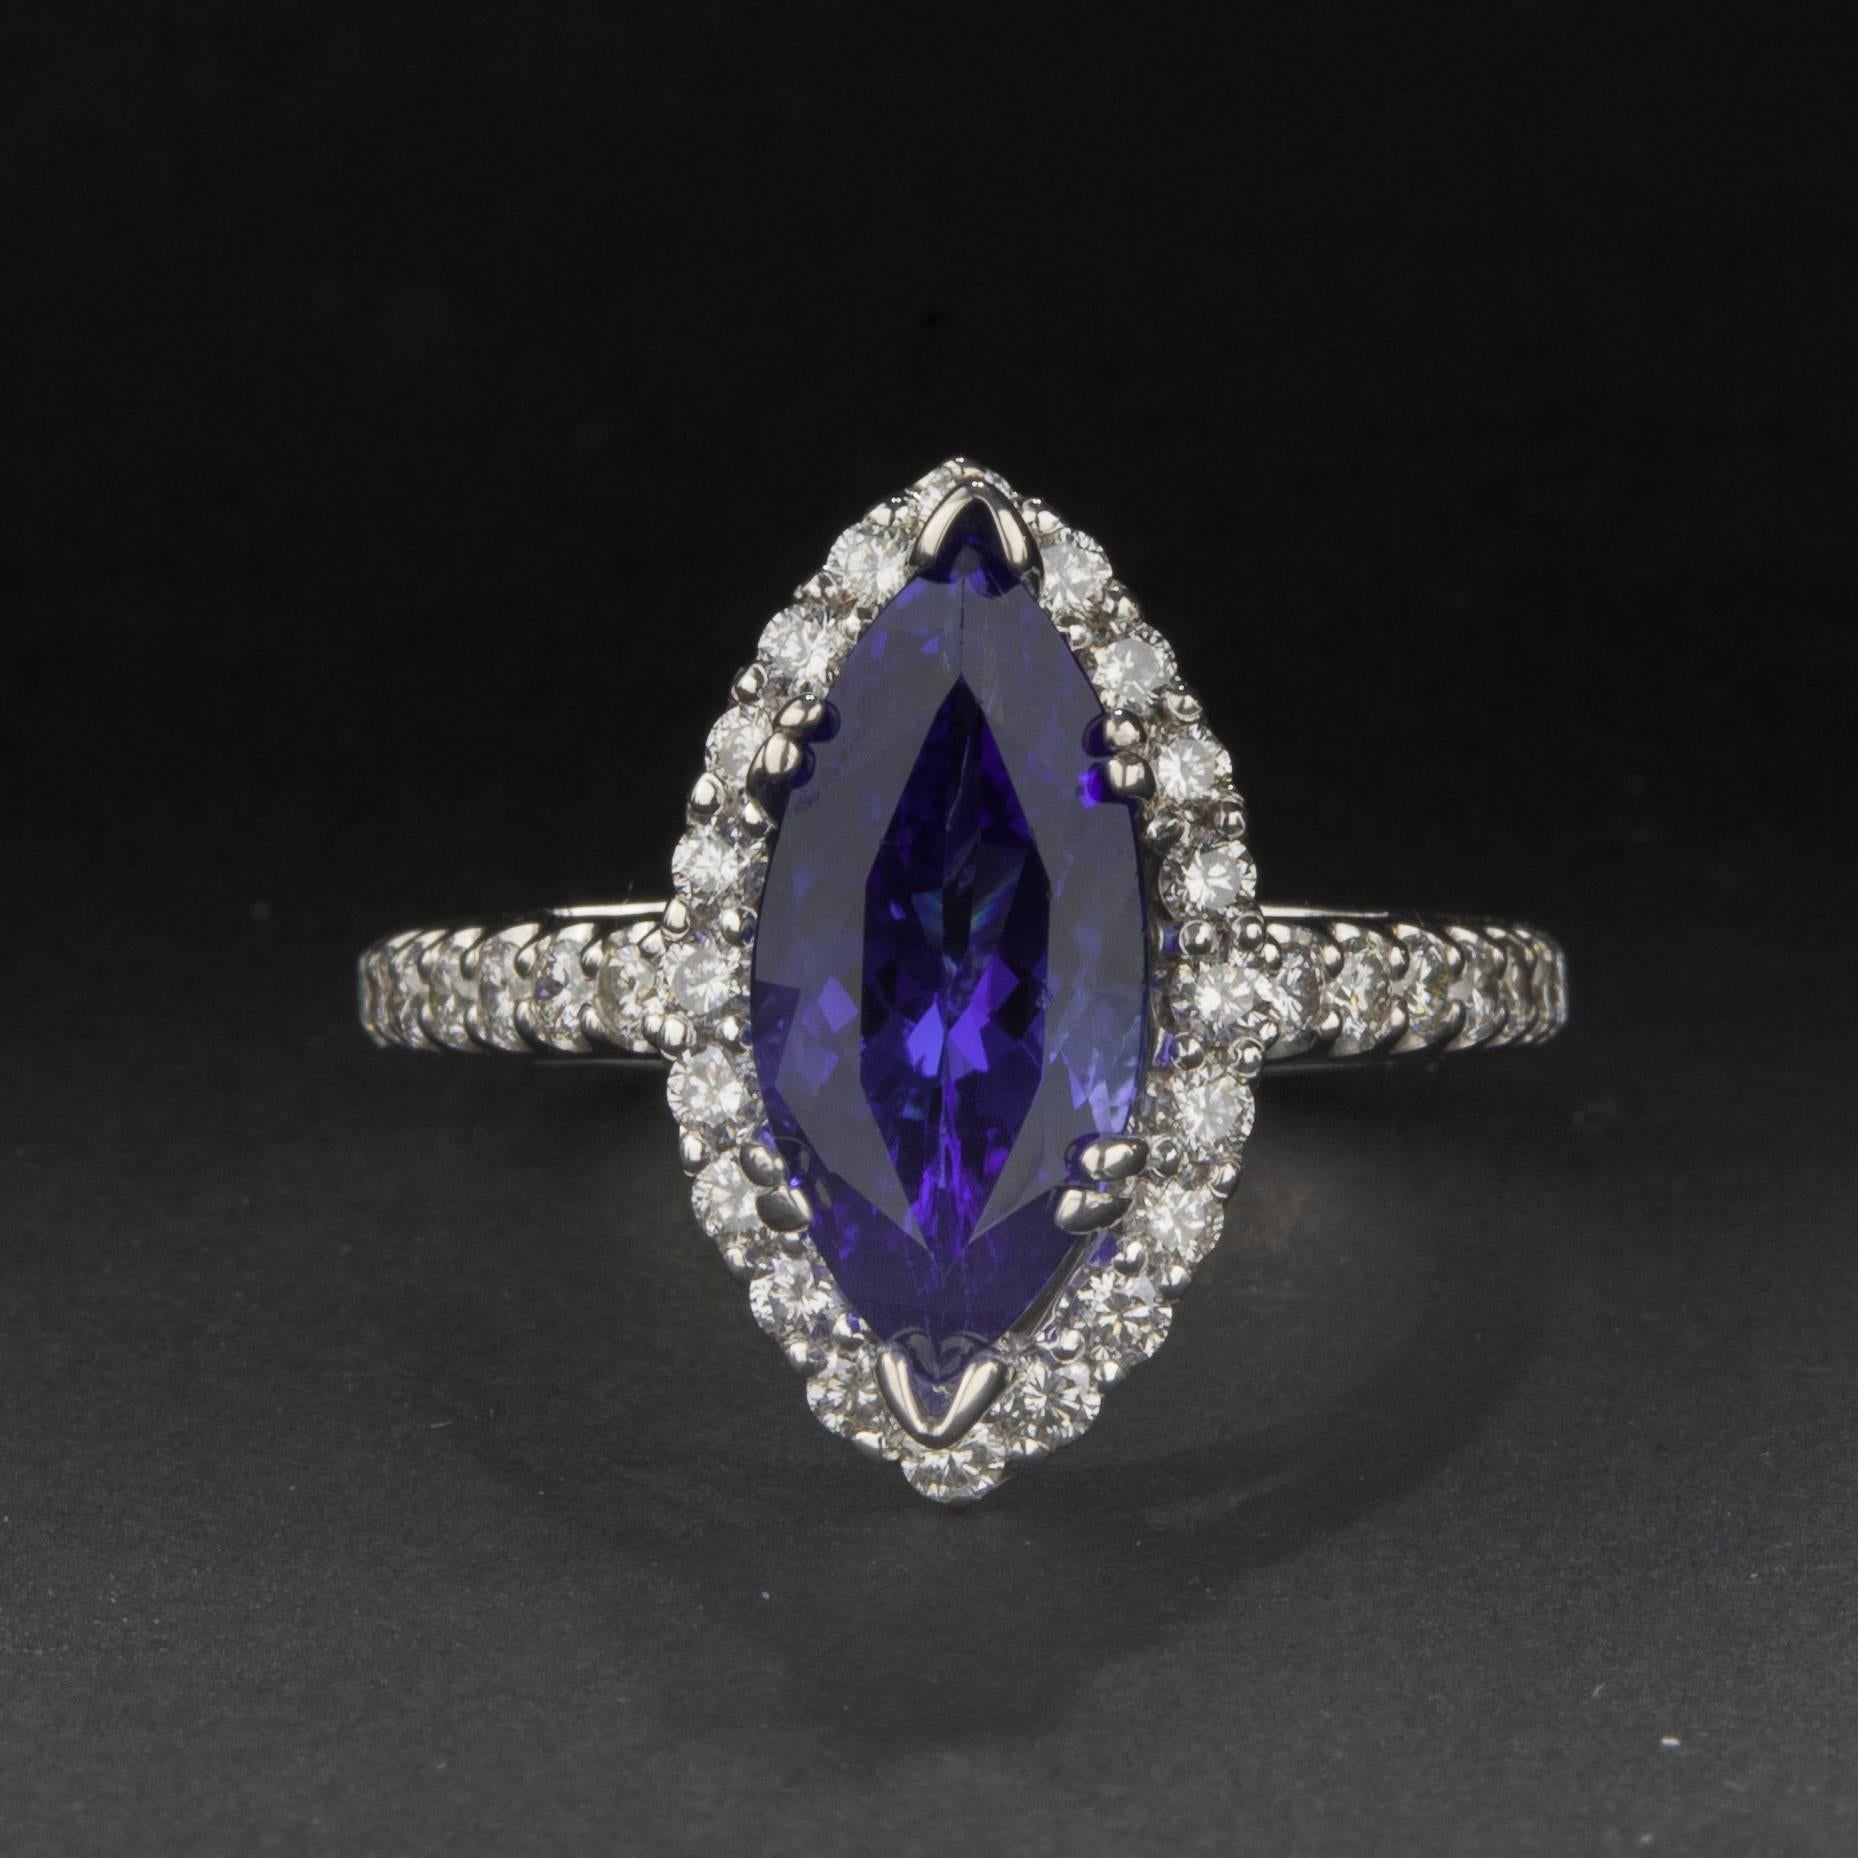 A beautiful 2.83 carat marquise cut tanzanite ring with diamond accents. The setting is crafted in 14k white gold and features approximately 1.00 total carats of diamonds. This ring is currently size 6.75.